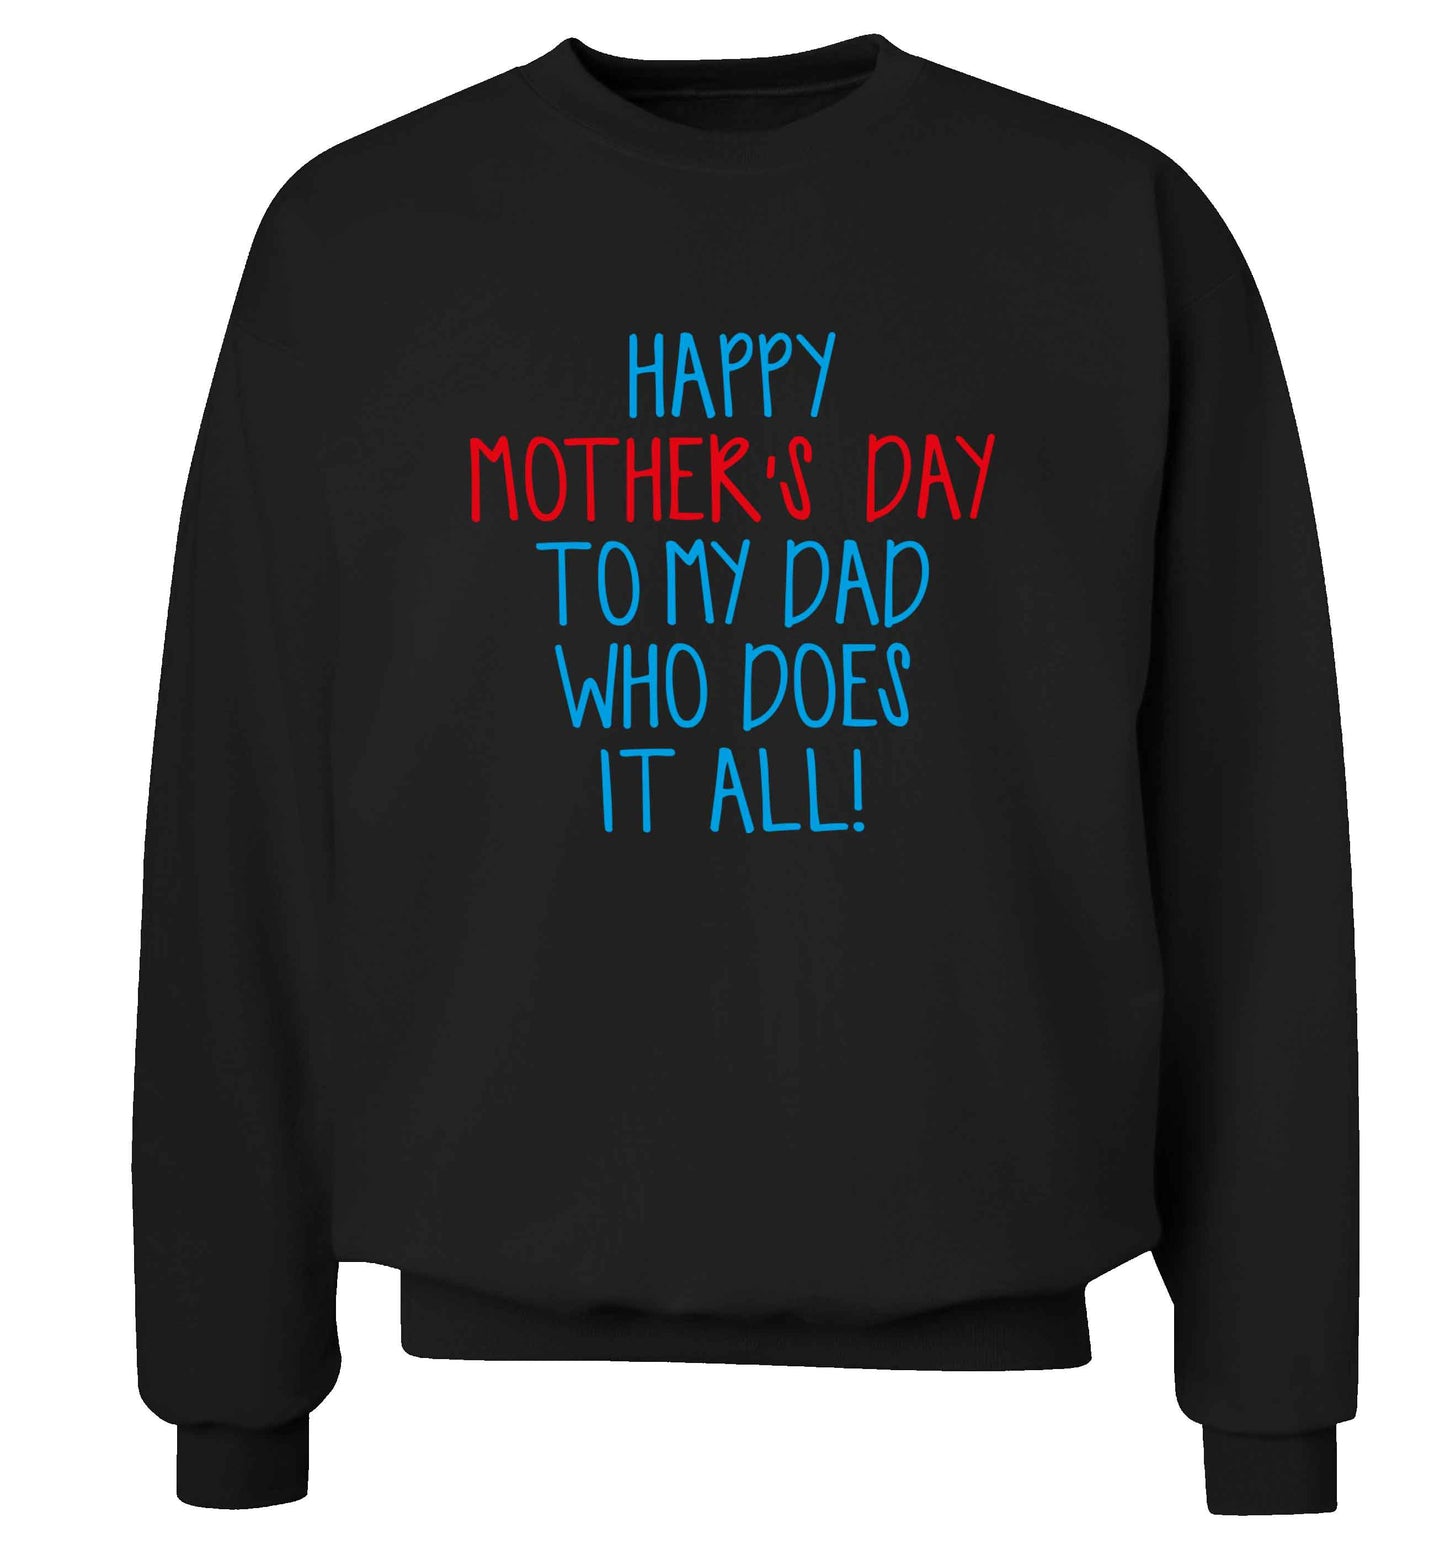 Happy mother's day to my dad who does it all! adult's unisex black sweater 2XL